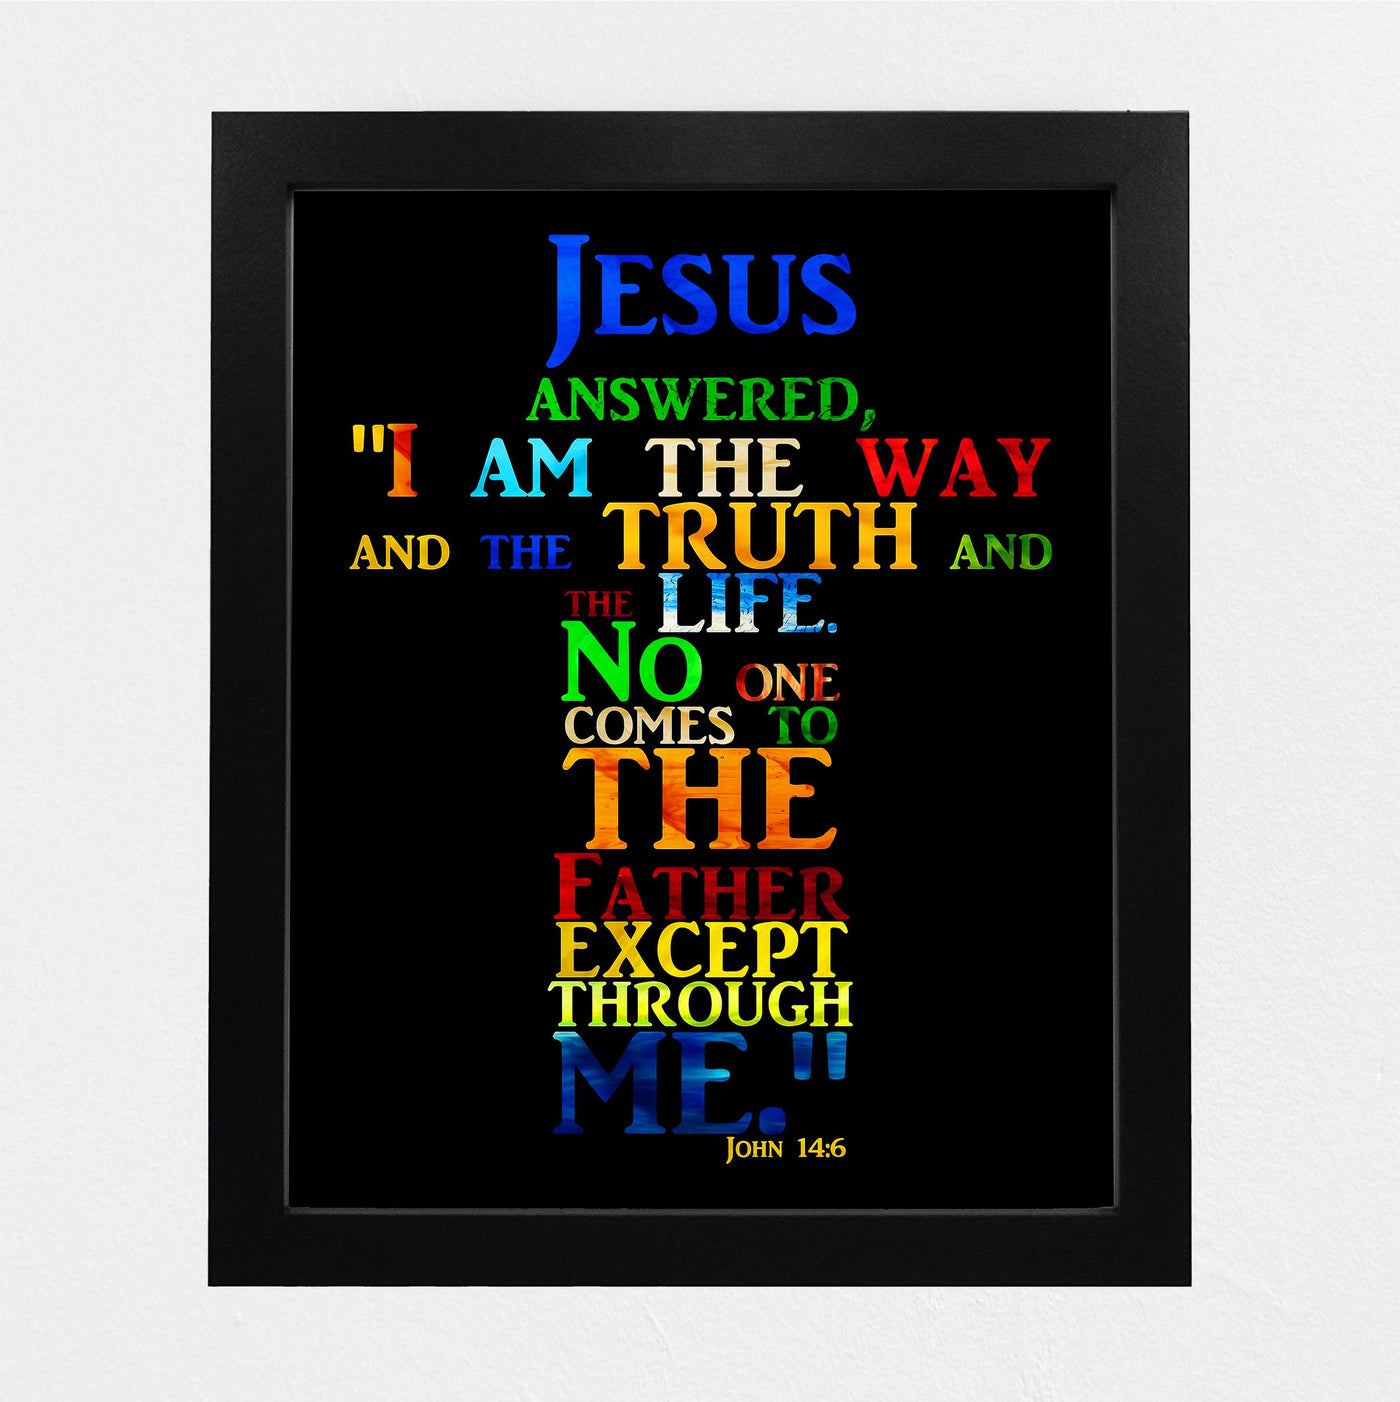 "Jesus-I Am the Way, Truth & Life"-Bible Verse Wall Art -Cross Word Art Sign -Scripture Wall Print-Ready to Frame. Home-Office-Church-Religious Decor. John 14:6. Great Christian Gift!